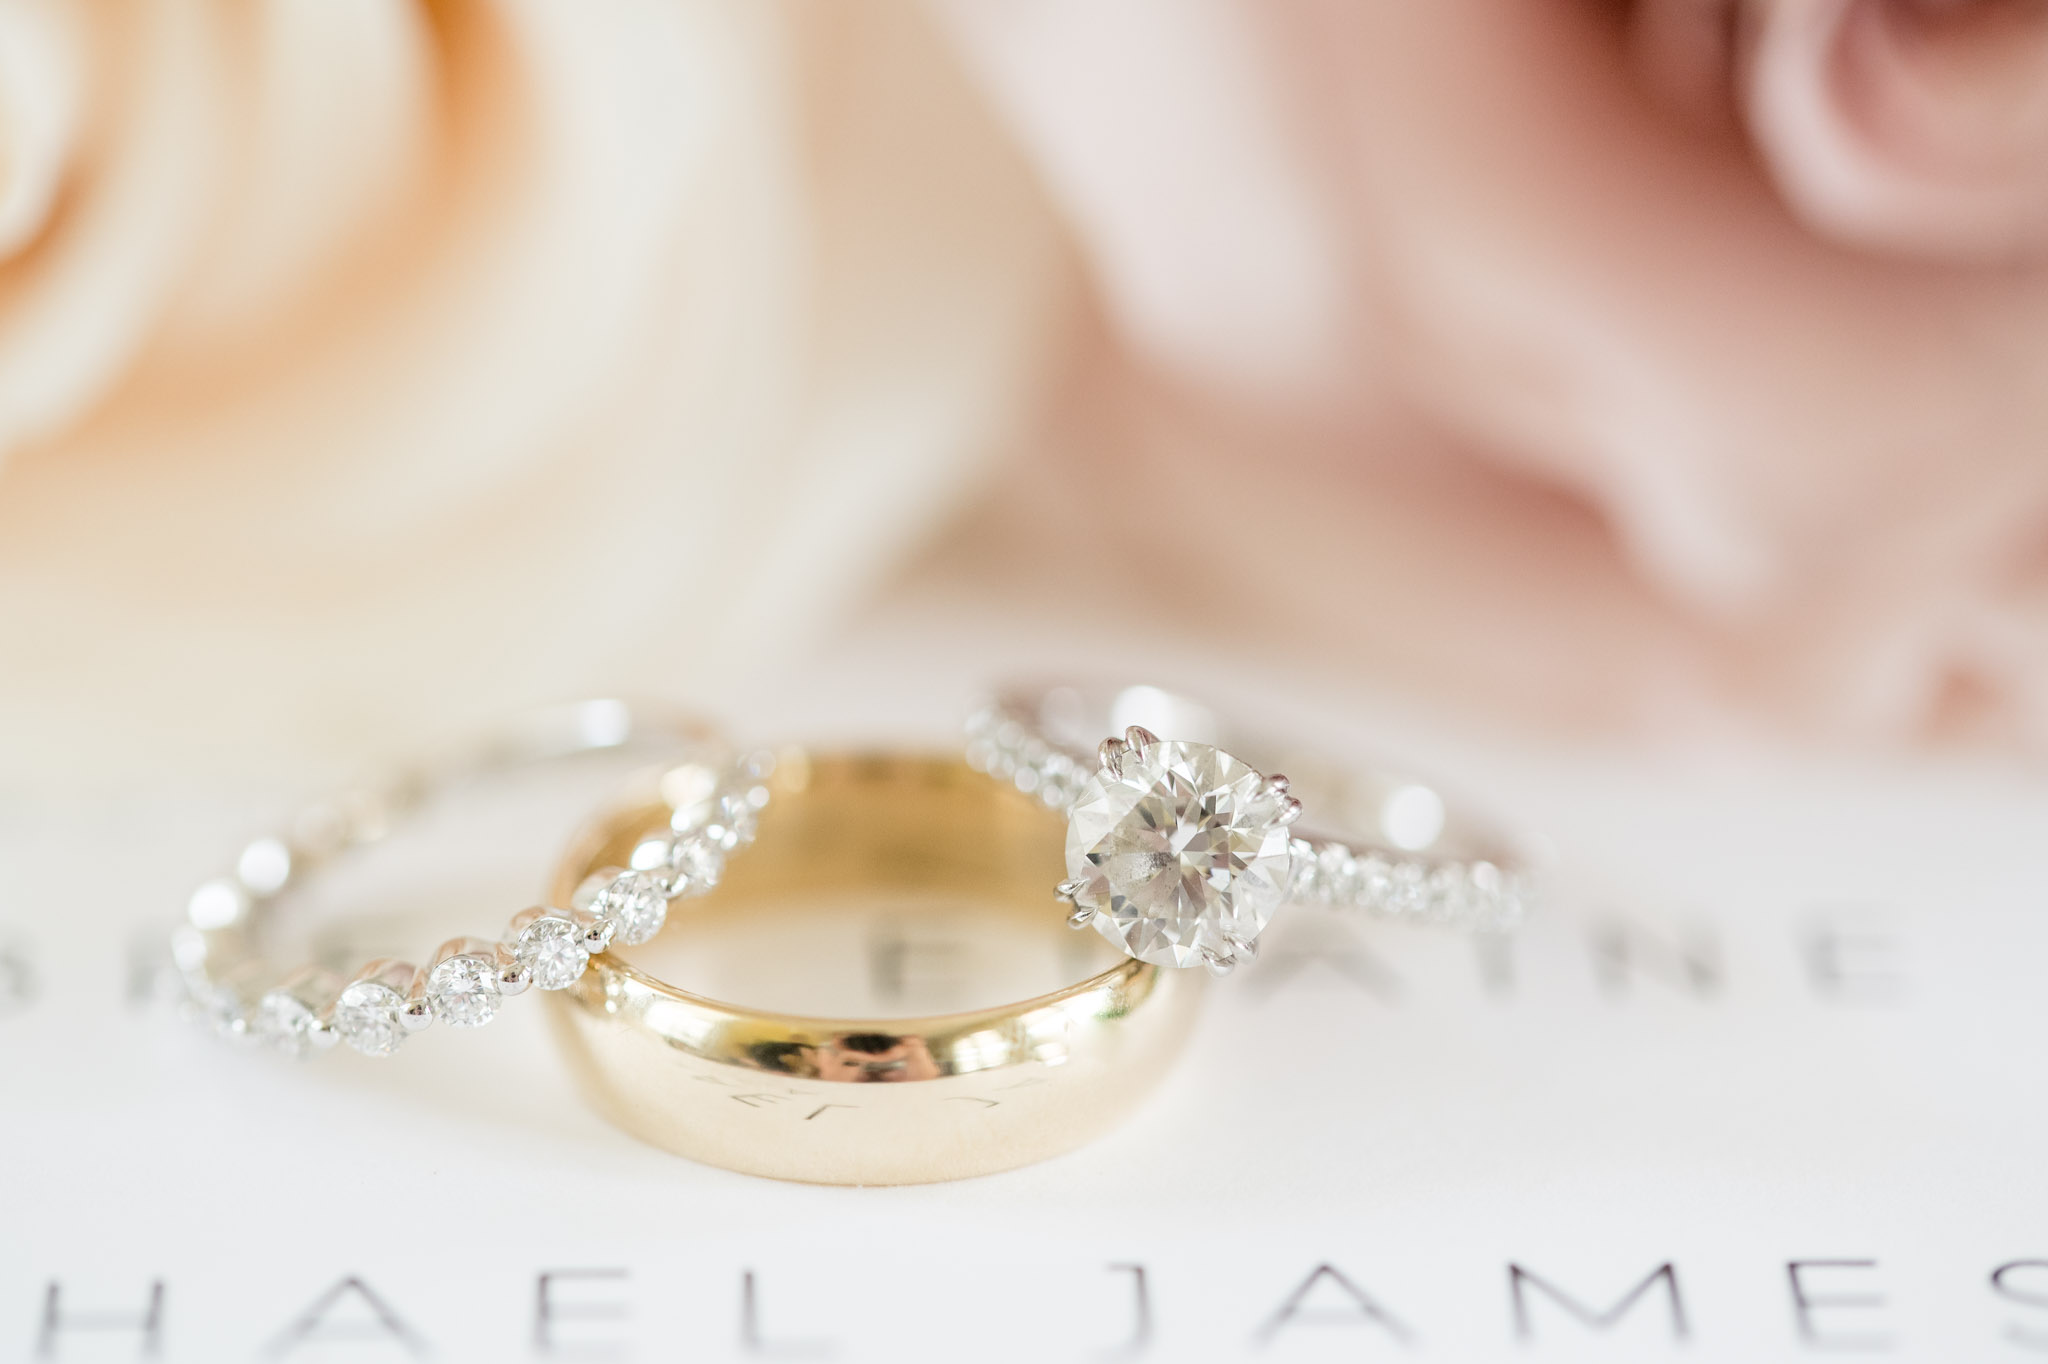 Closeup of wedding and engagement rings.